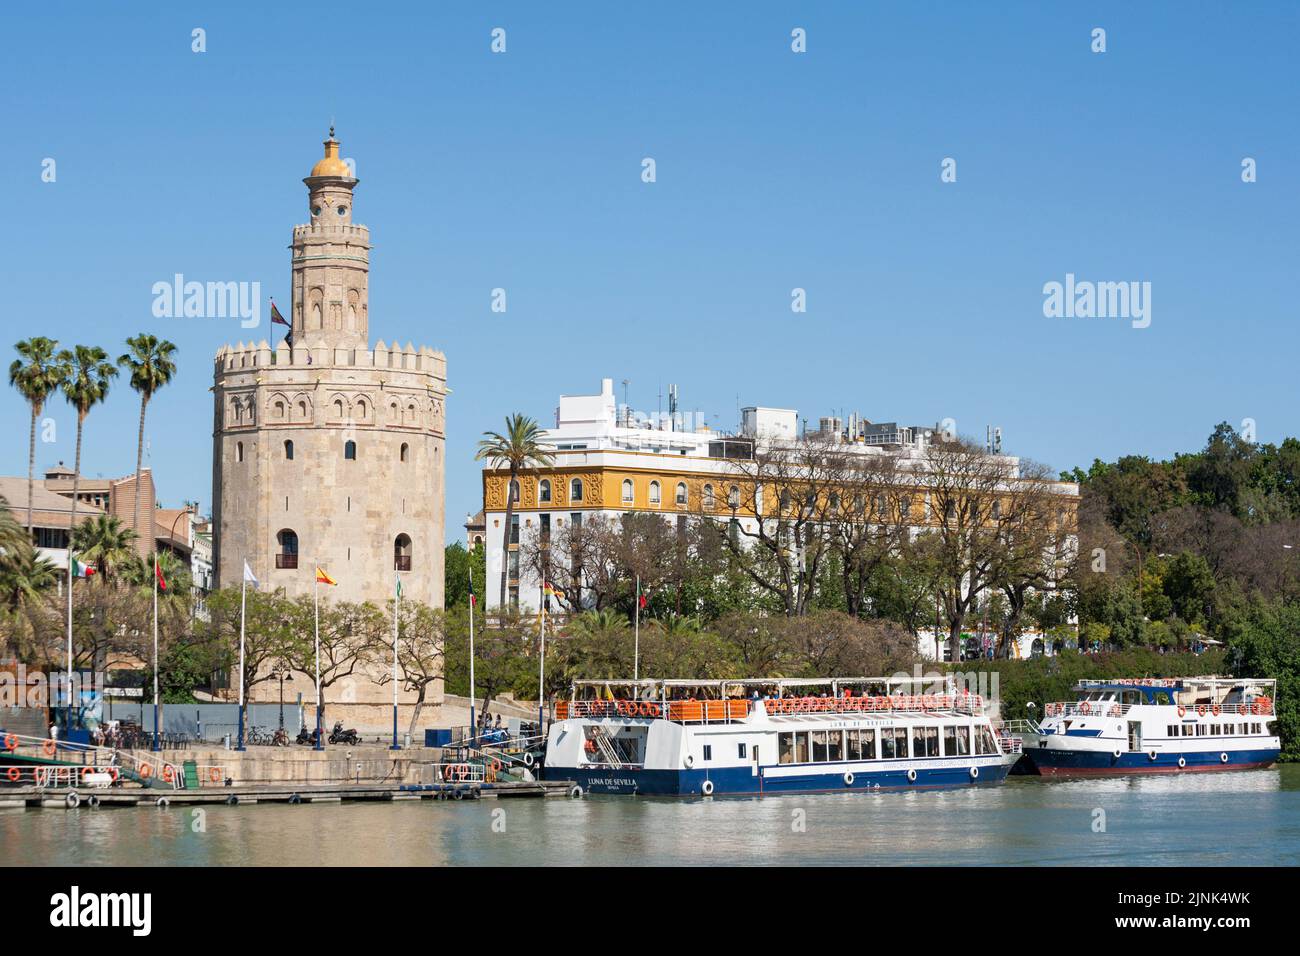 Excursion boats moored at the pier of 13th century watchtower Torre del Oro at Seville, Spain Stock Photo